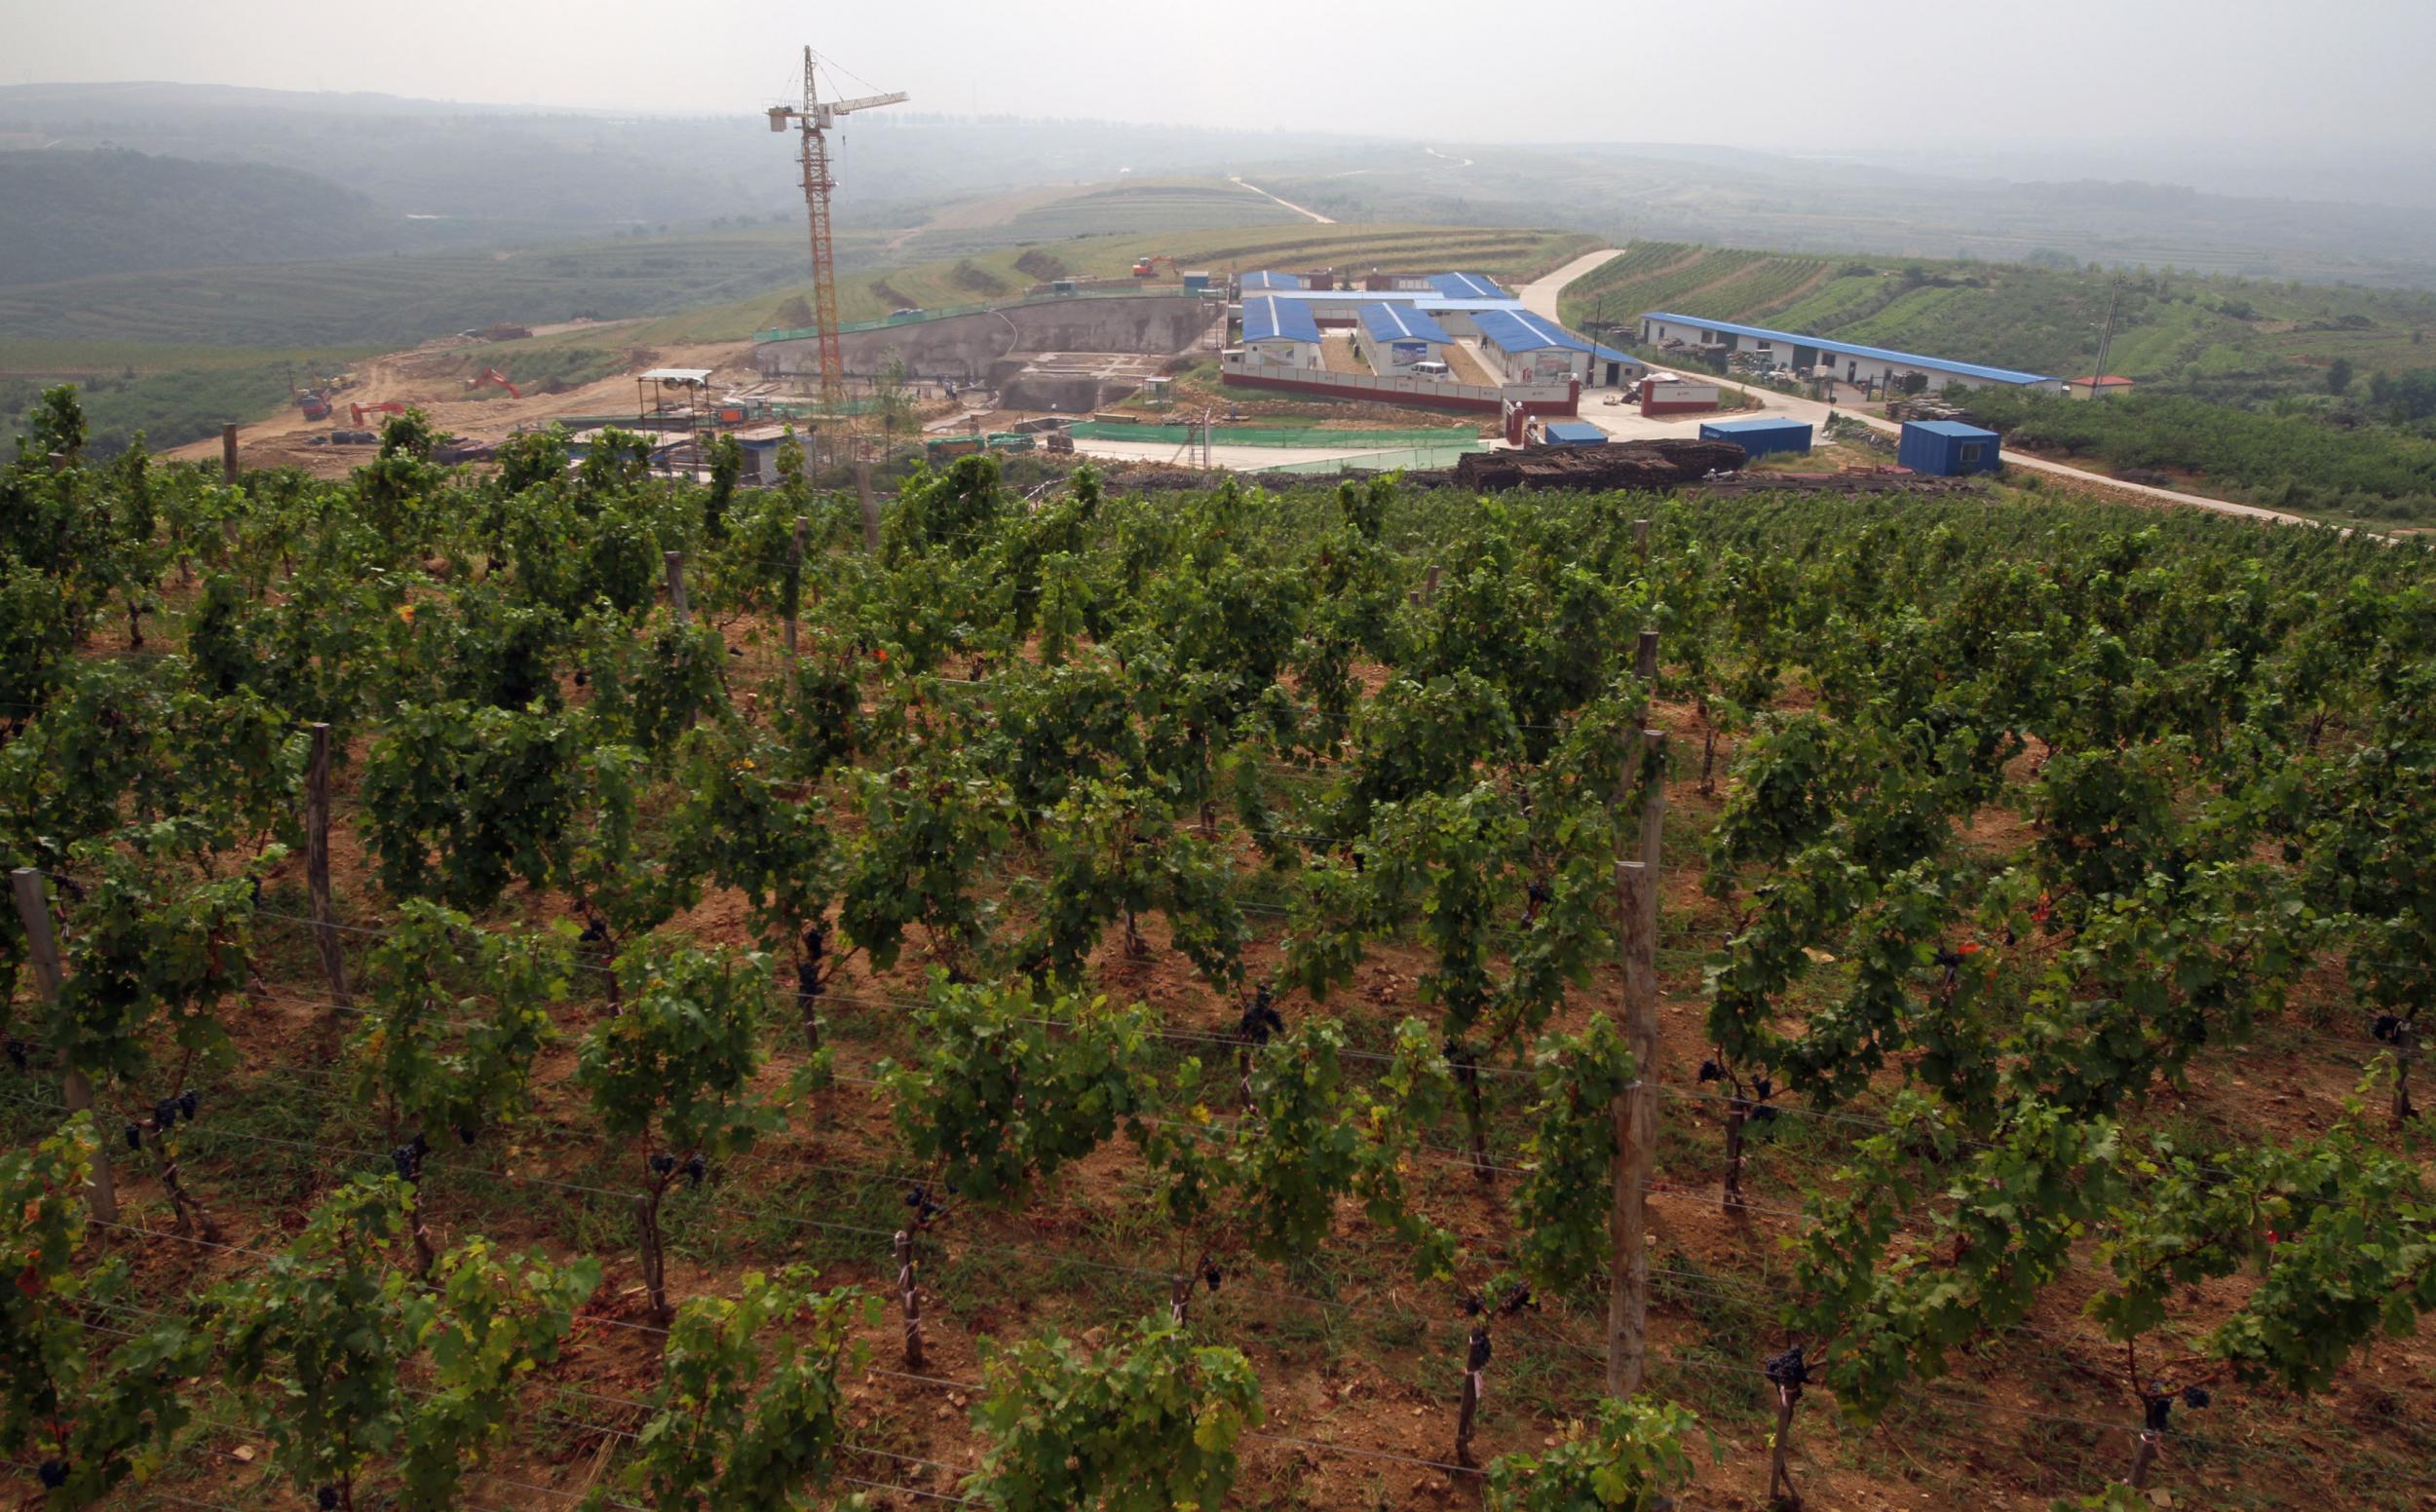 The vineyard owned by France’s Domaine Barons de Rothschild, maker of the renowned Chateau Lafite reds, in Penglai, Shandong province